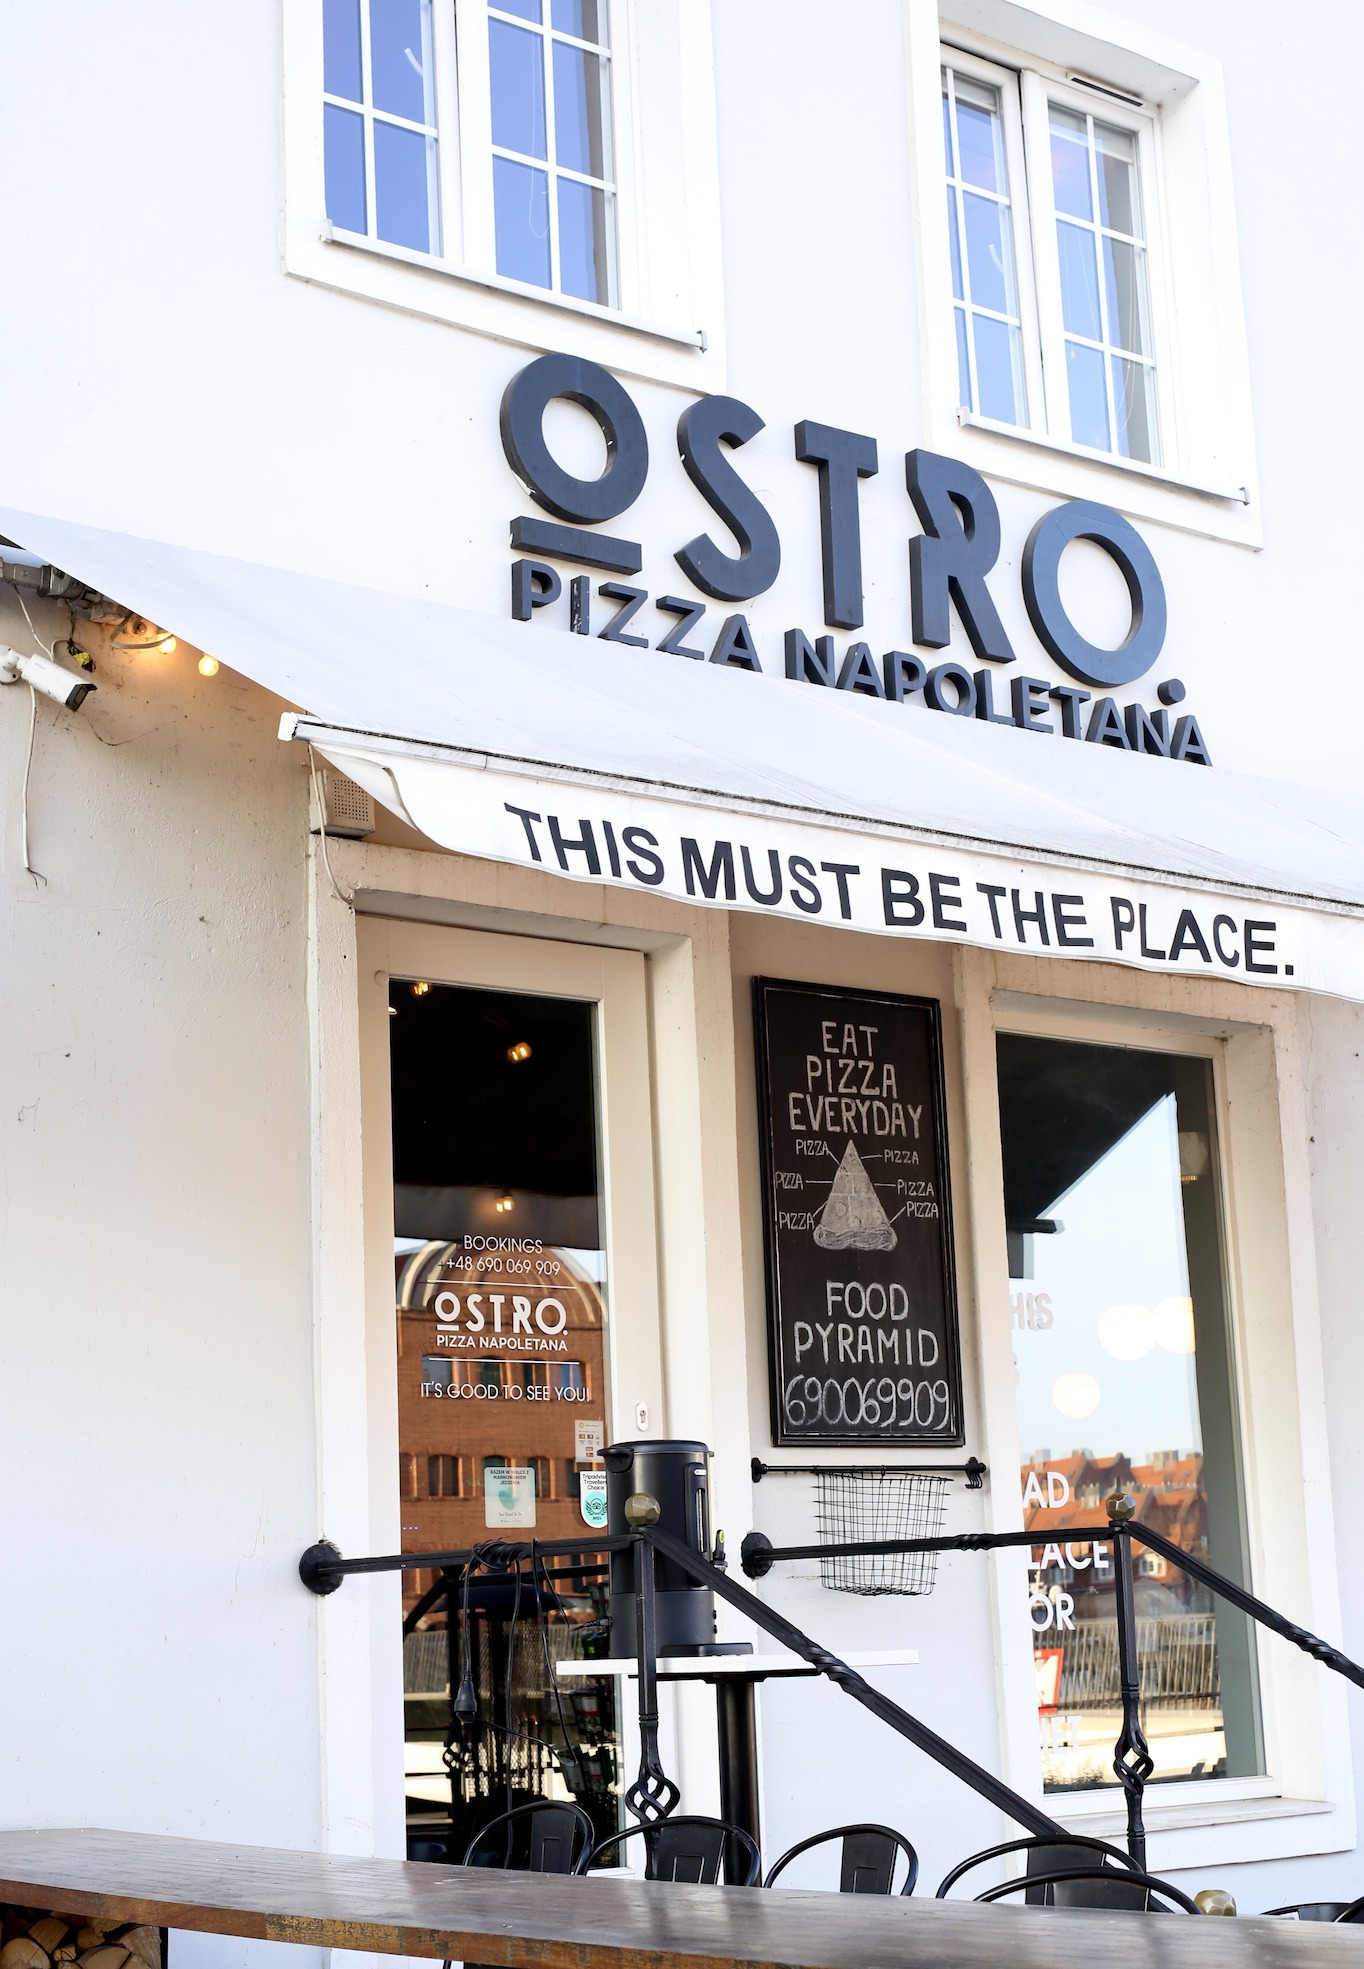 The best Italian pizza you can find in Gdansk! Photo by Zofia Cudny